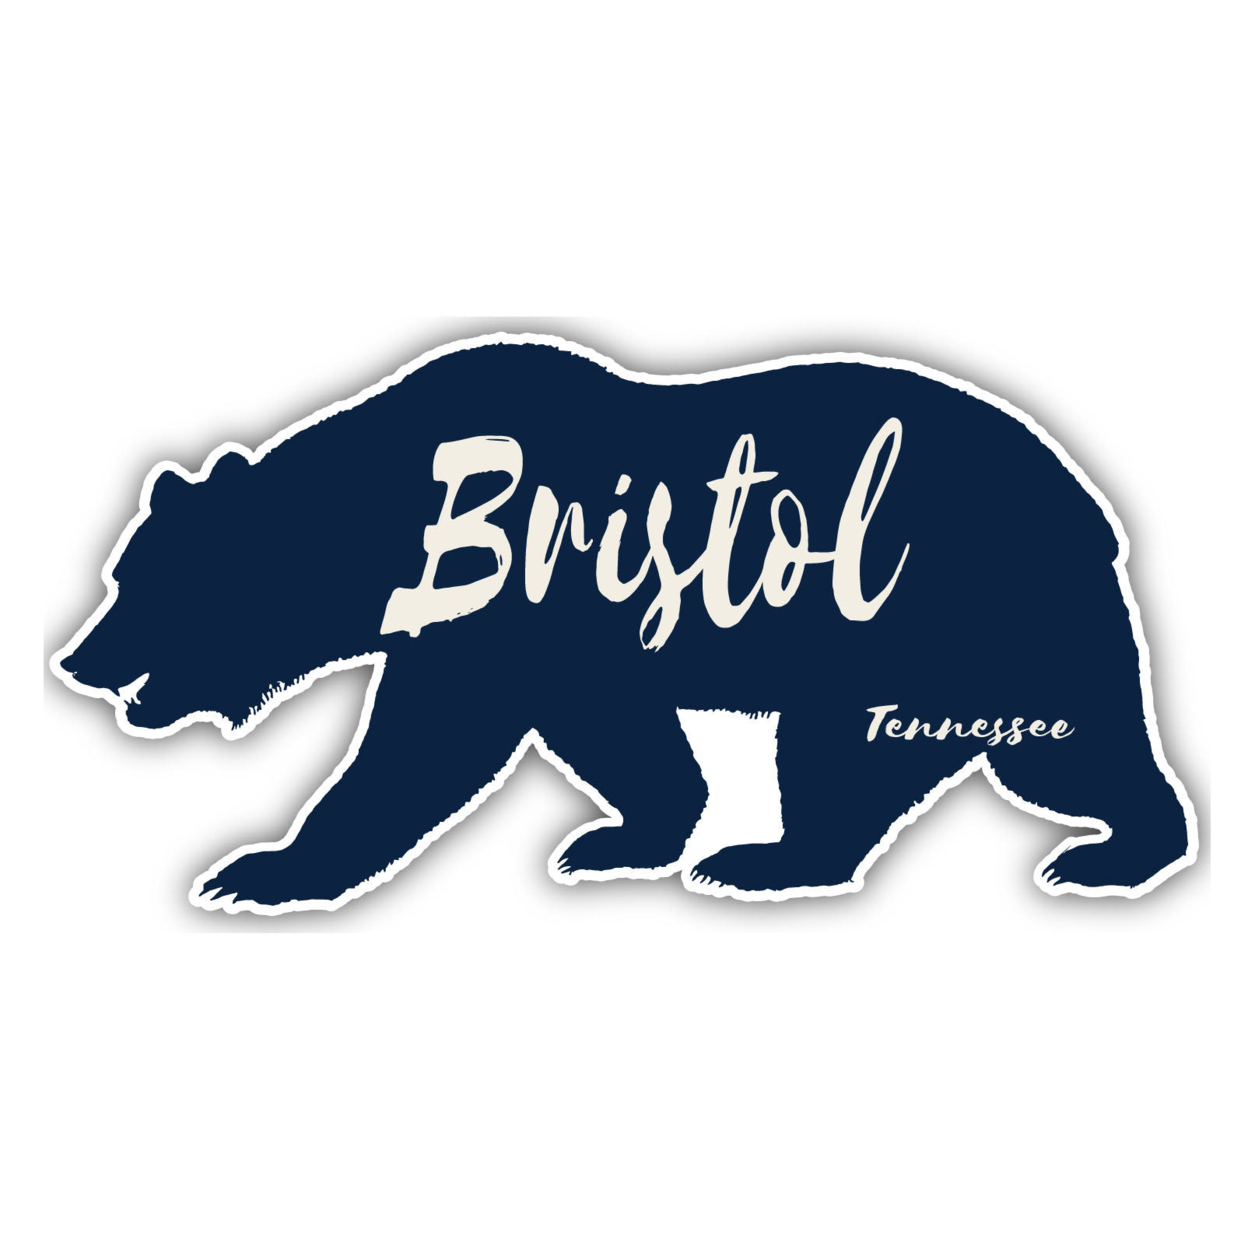 Bristol Tennessee Souvenir Decorative Stickers (Choose Theme And Size) - Single Unit, 12-Inch, Adventures Awaits